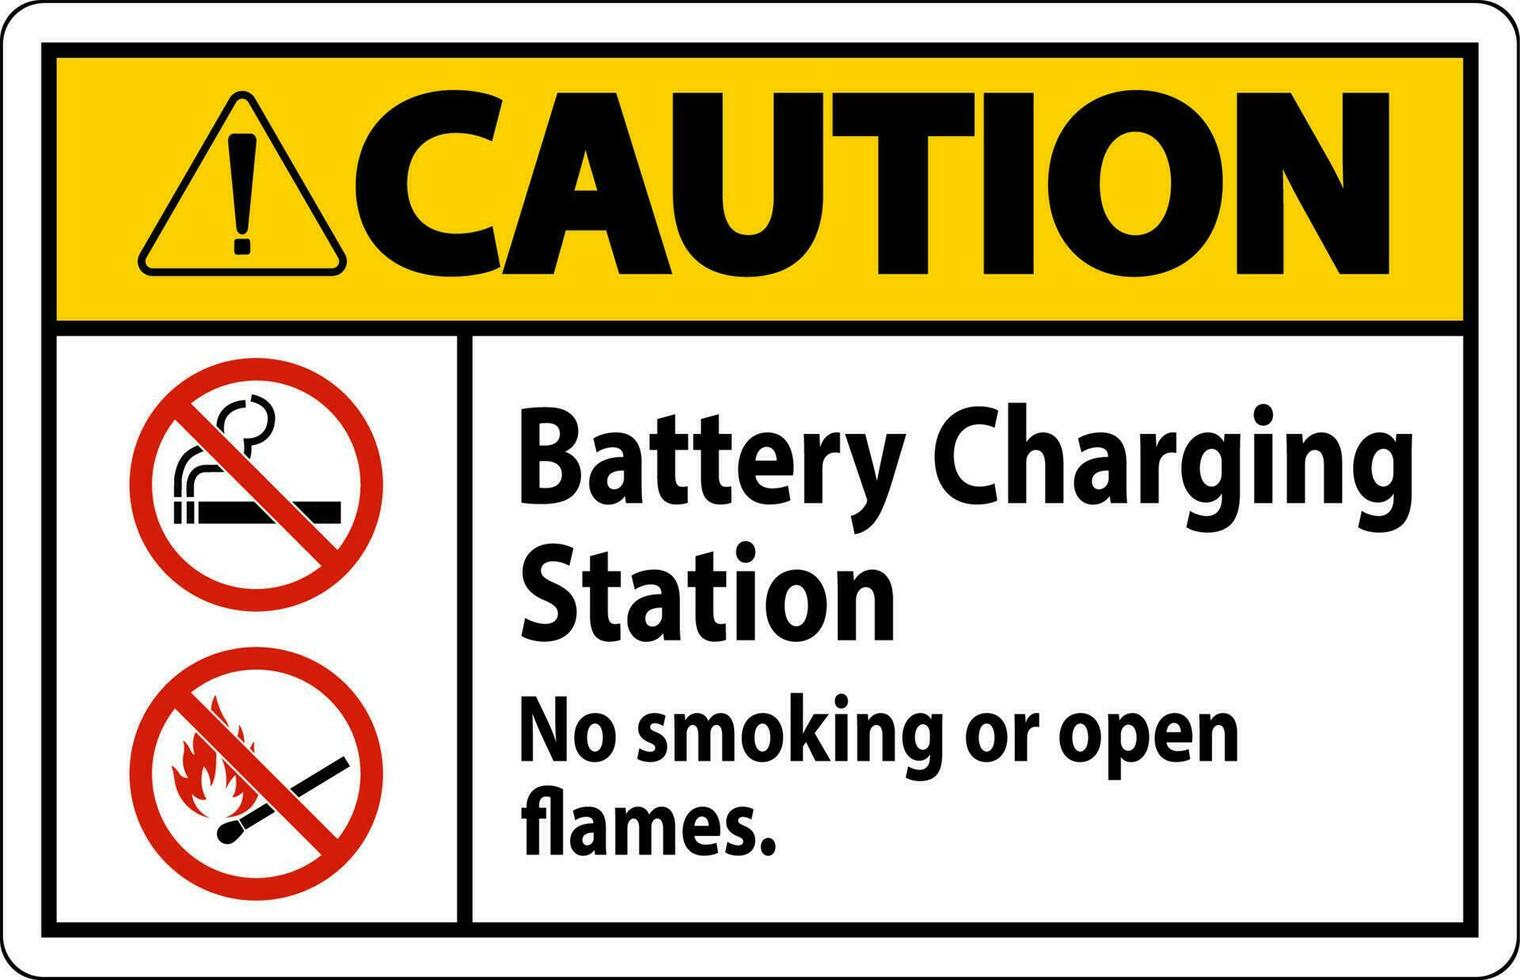 Caution Sign Battery Charging Station, No Smoking Or Open Flames vector